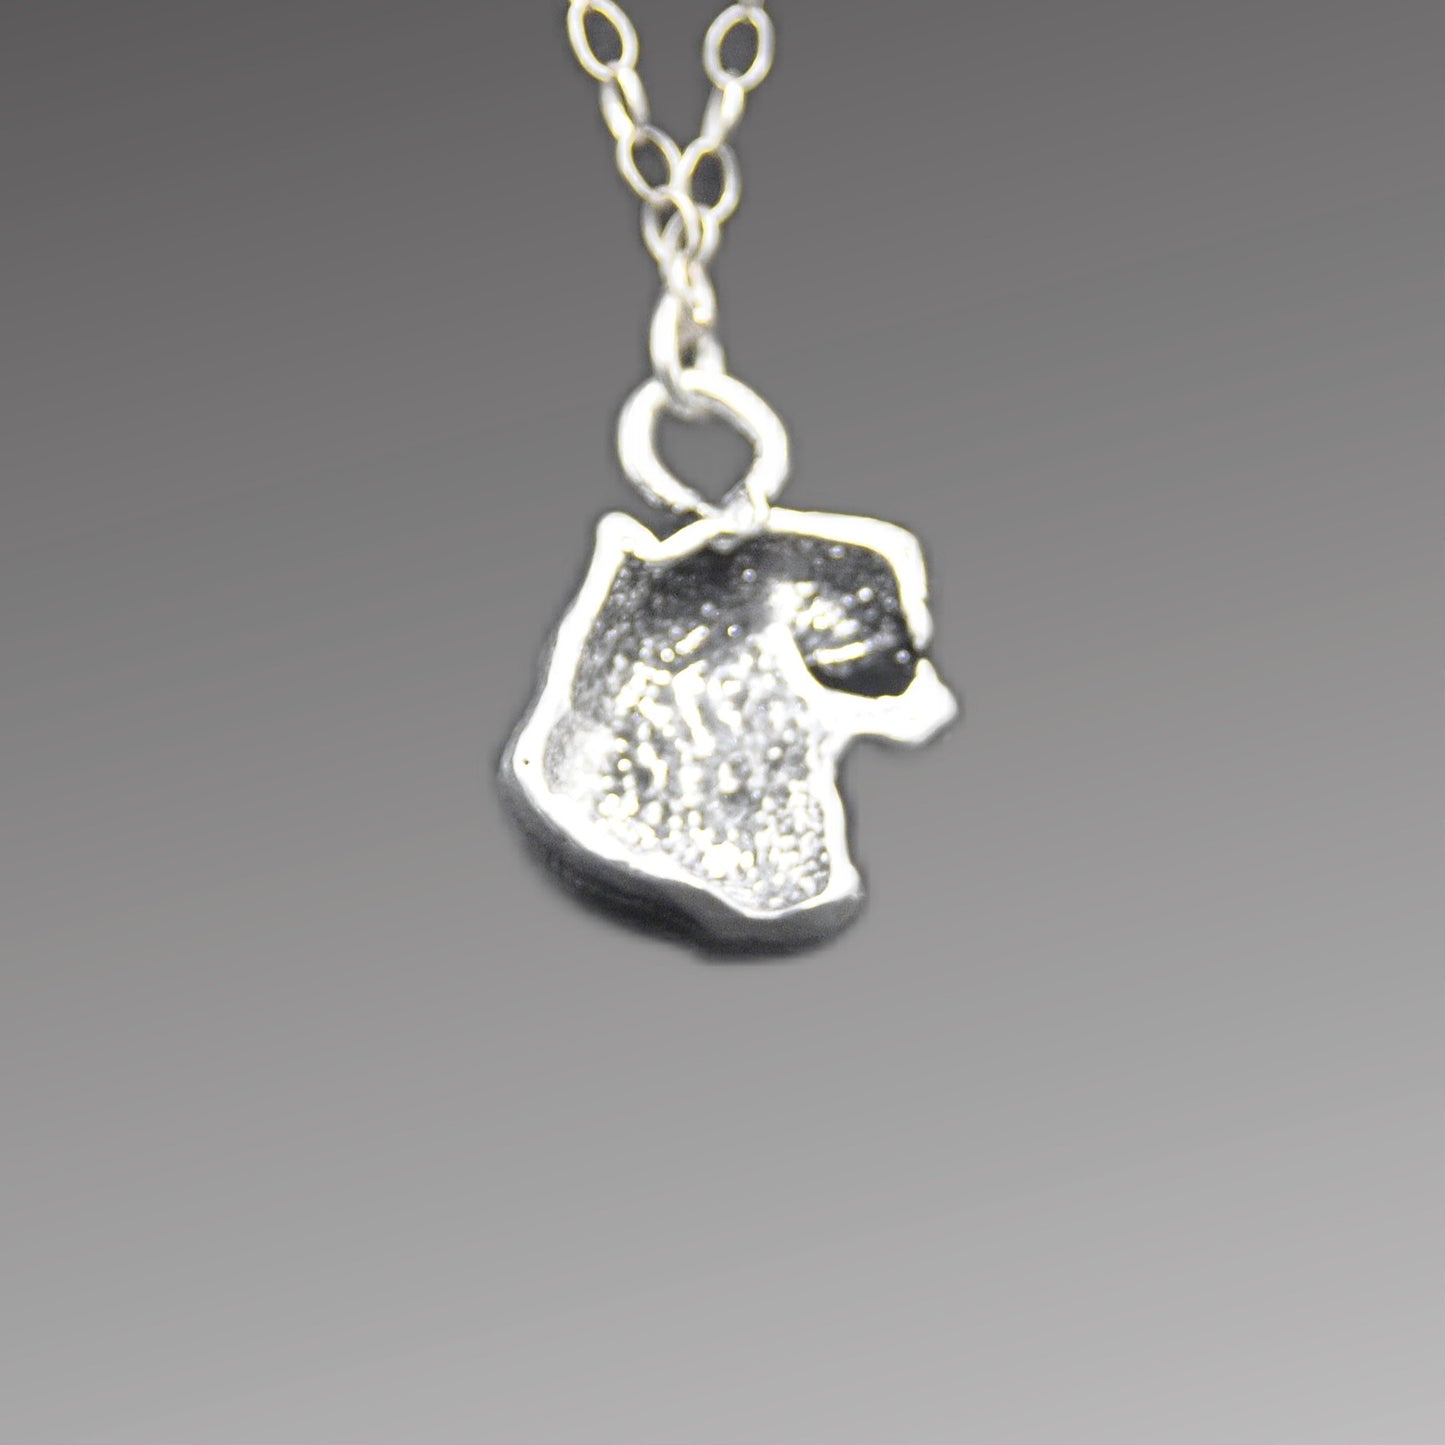 Tiger Necklace Recycled Sterling Silver .925 Cable Chain Endangered Species